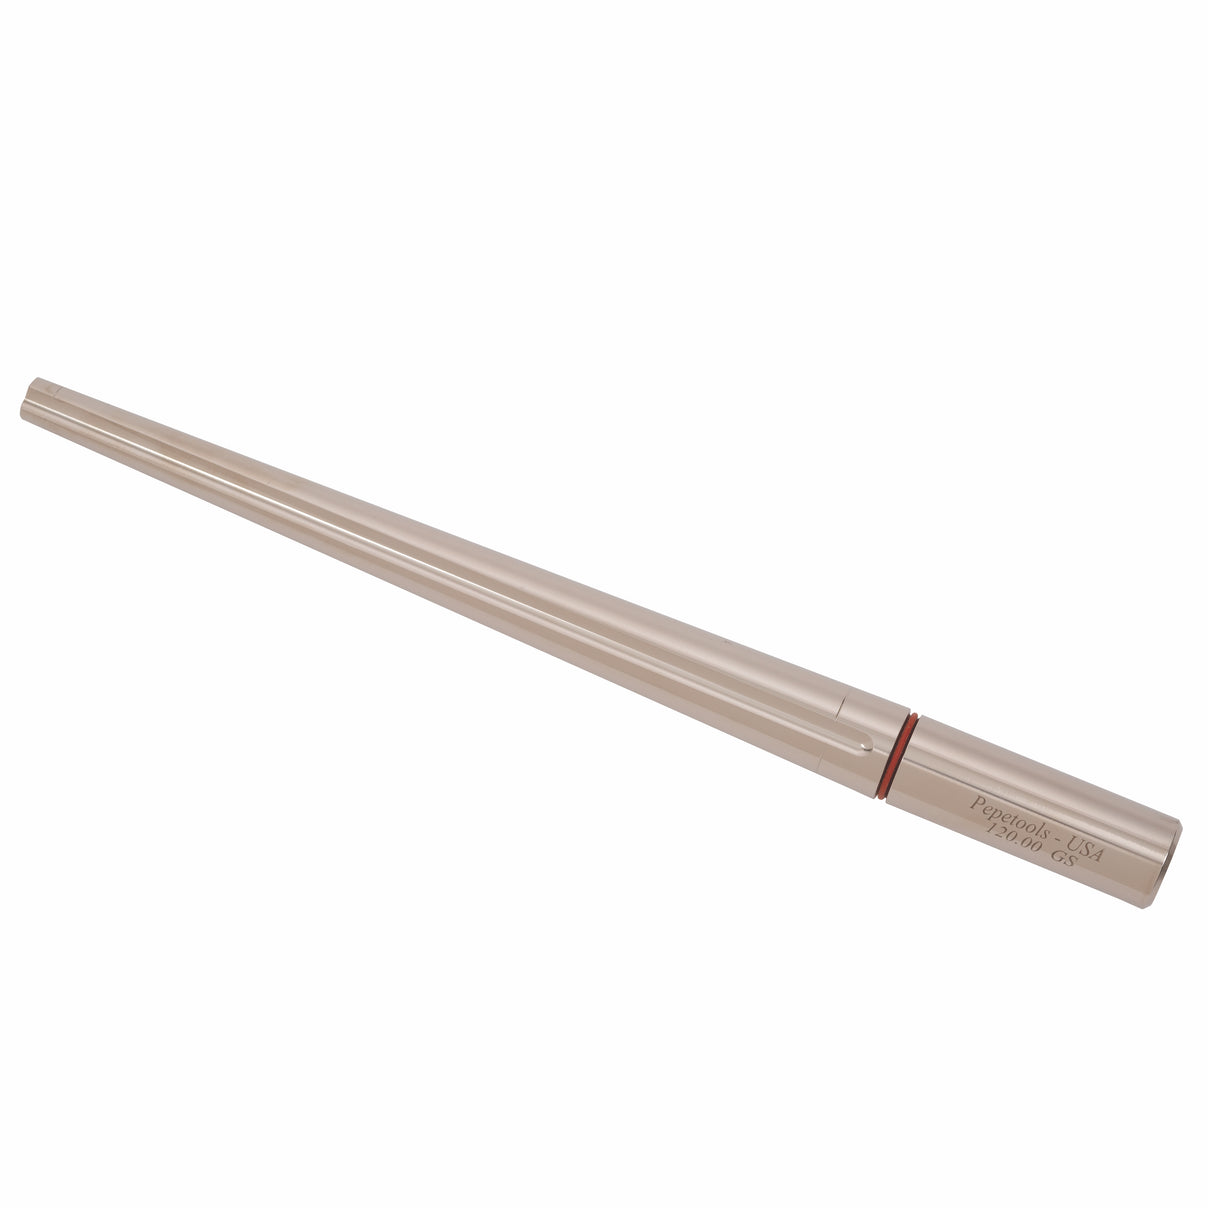 Pepe Tools Steel Ring Mandrel with Groove - Gold Standard